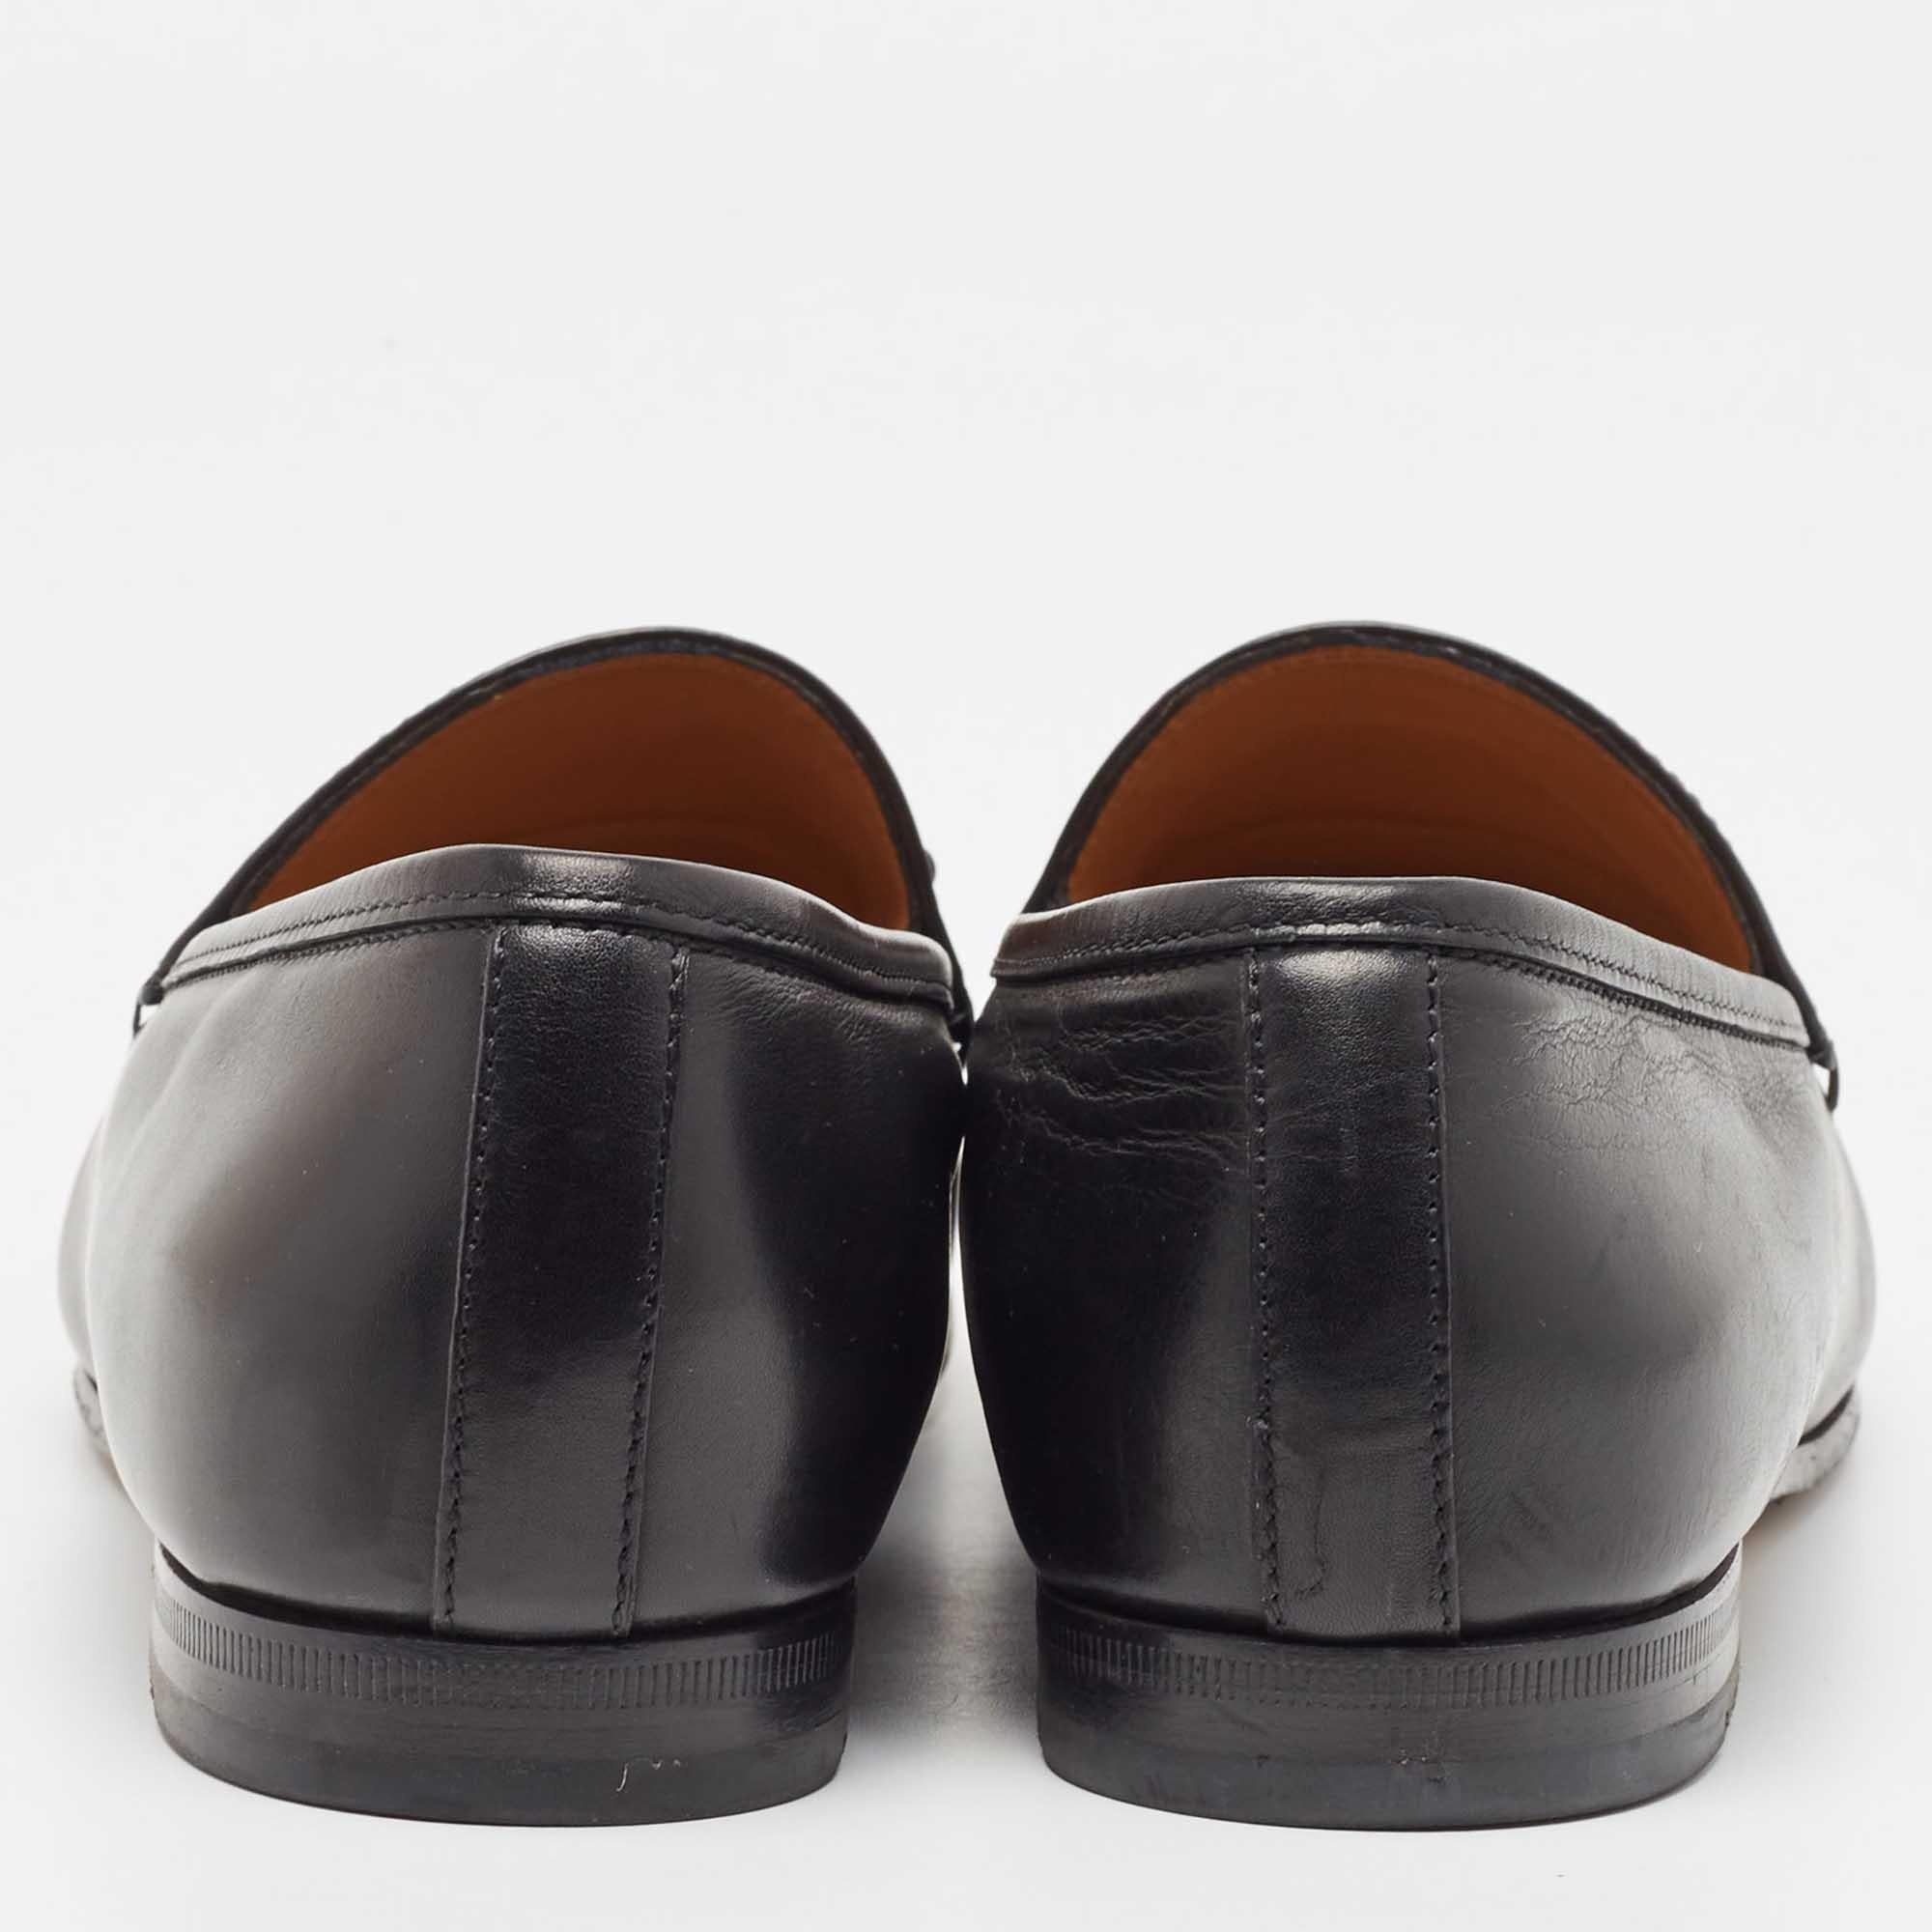 Gucci Black Leather Jordaan Loafers Size 39 1